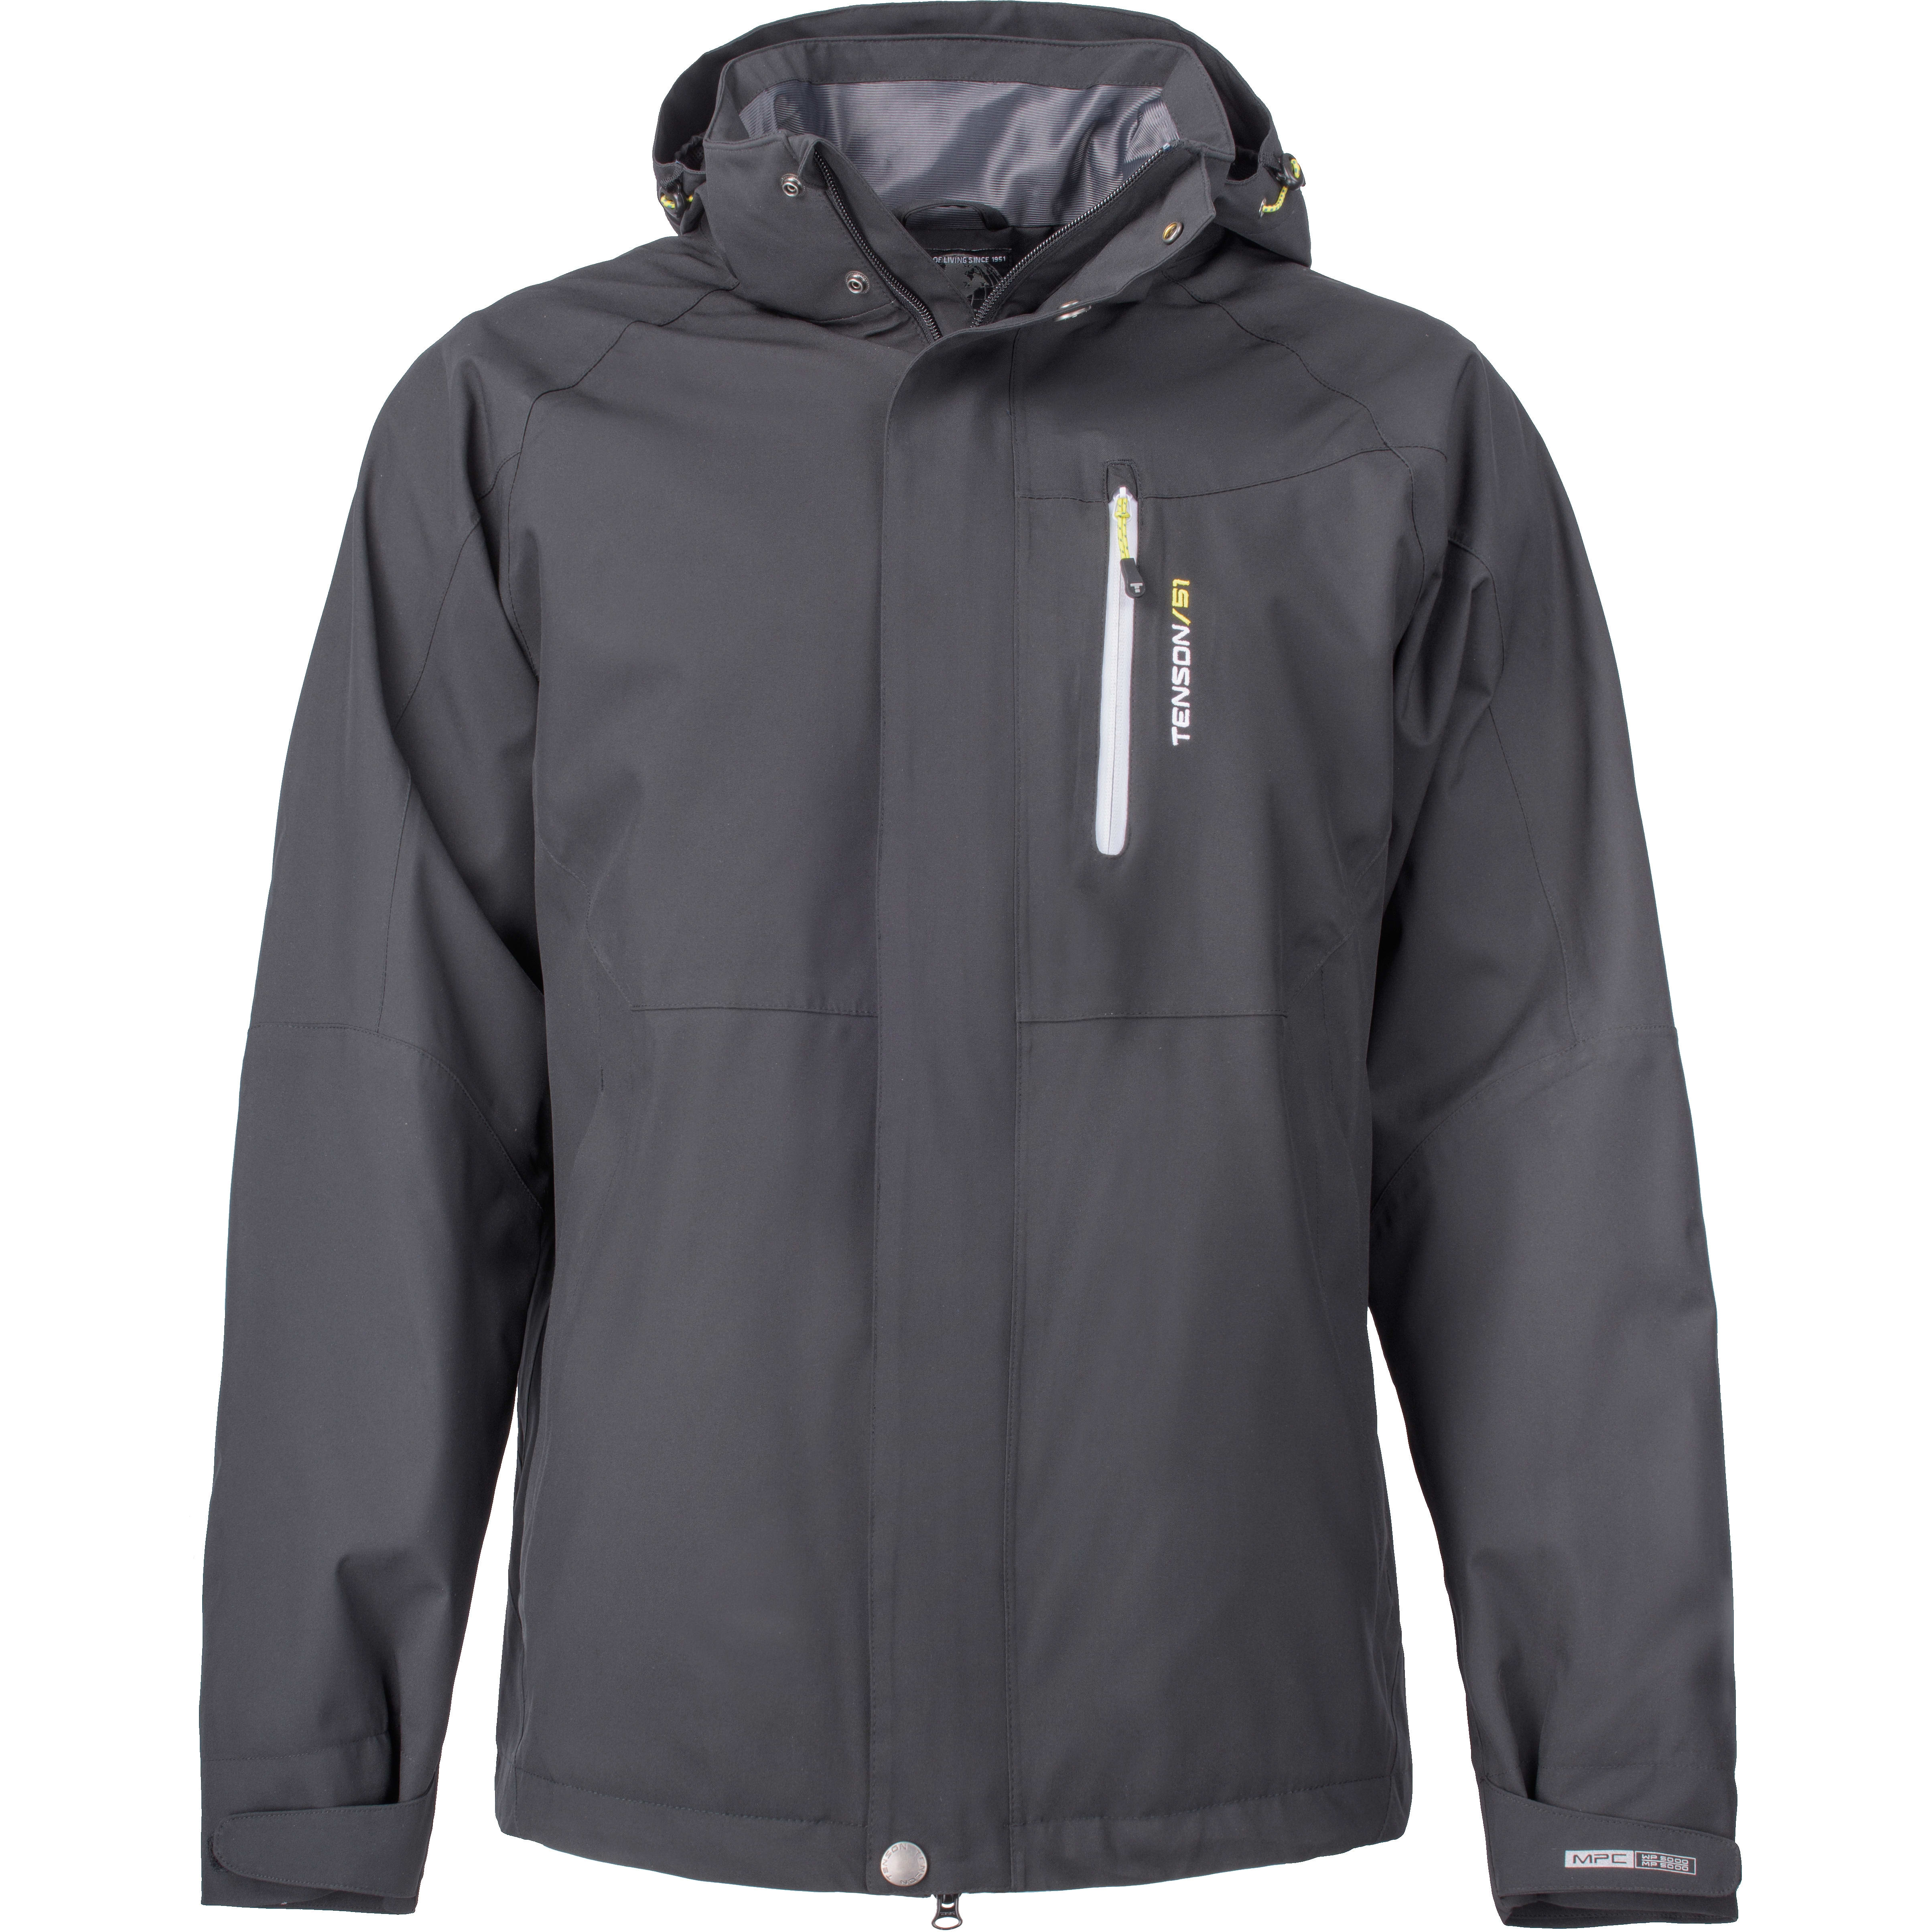 Buy Tenson Northwest M Jacket from Outnorth